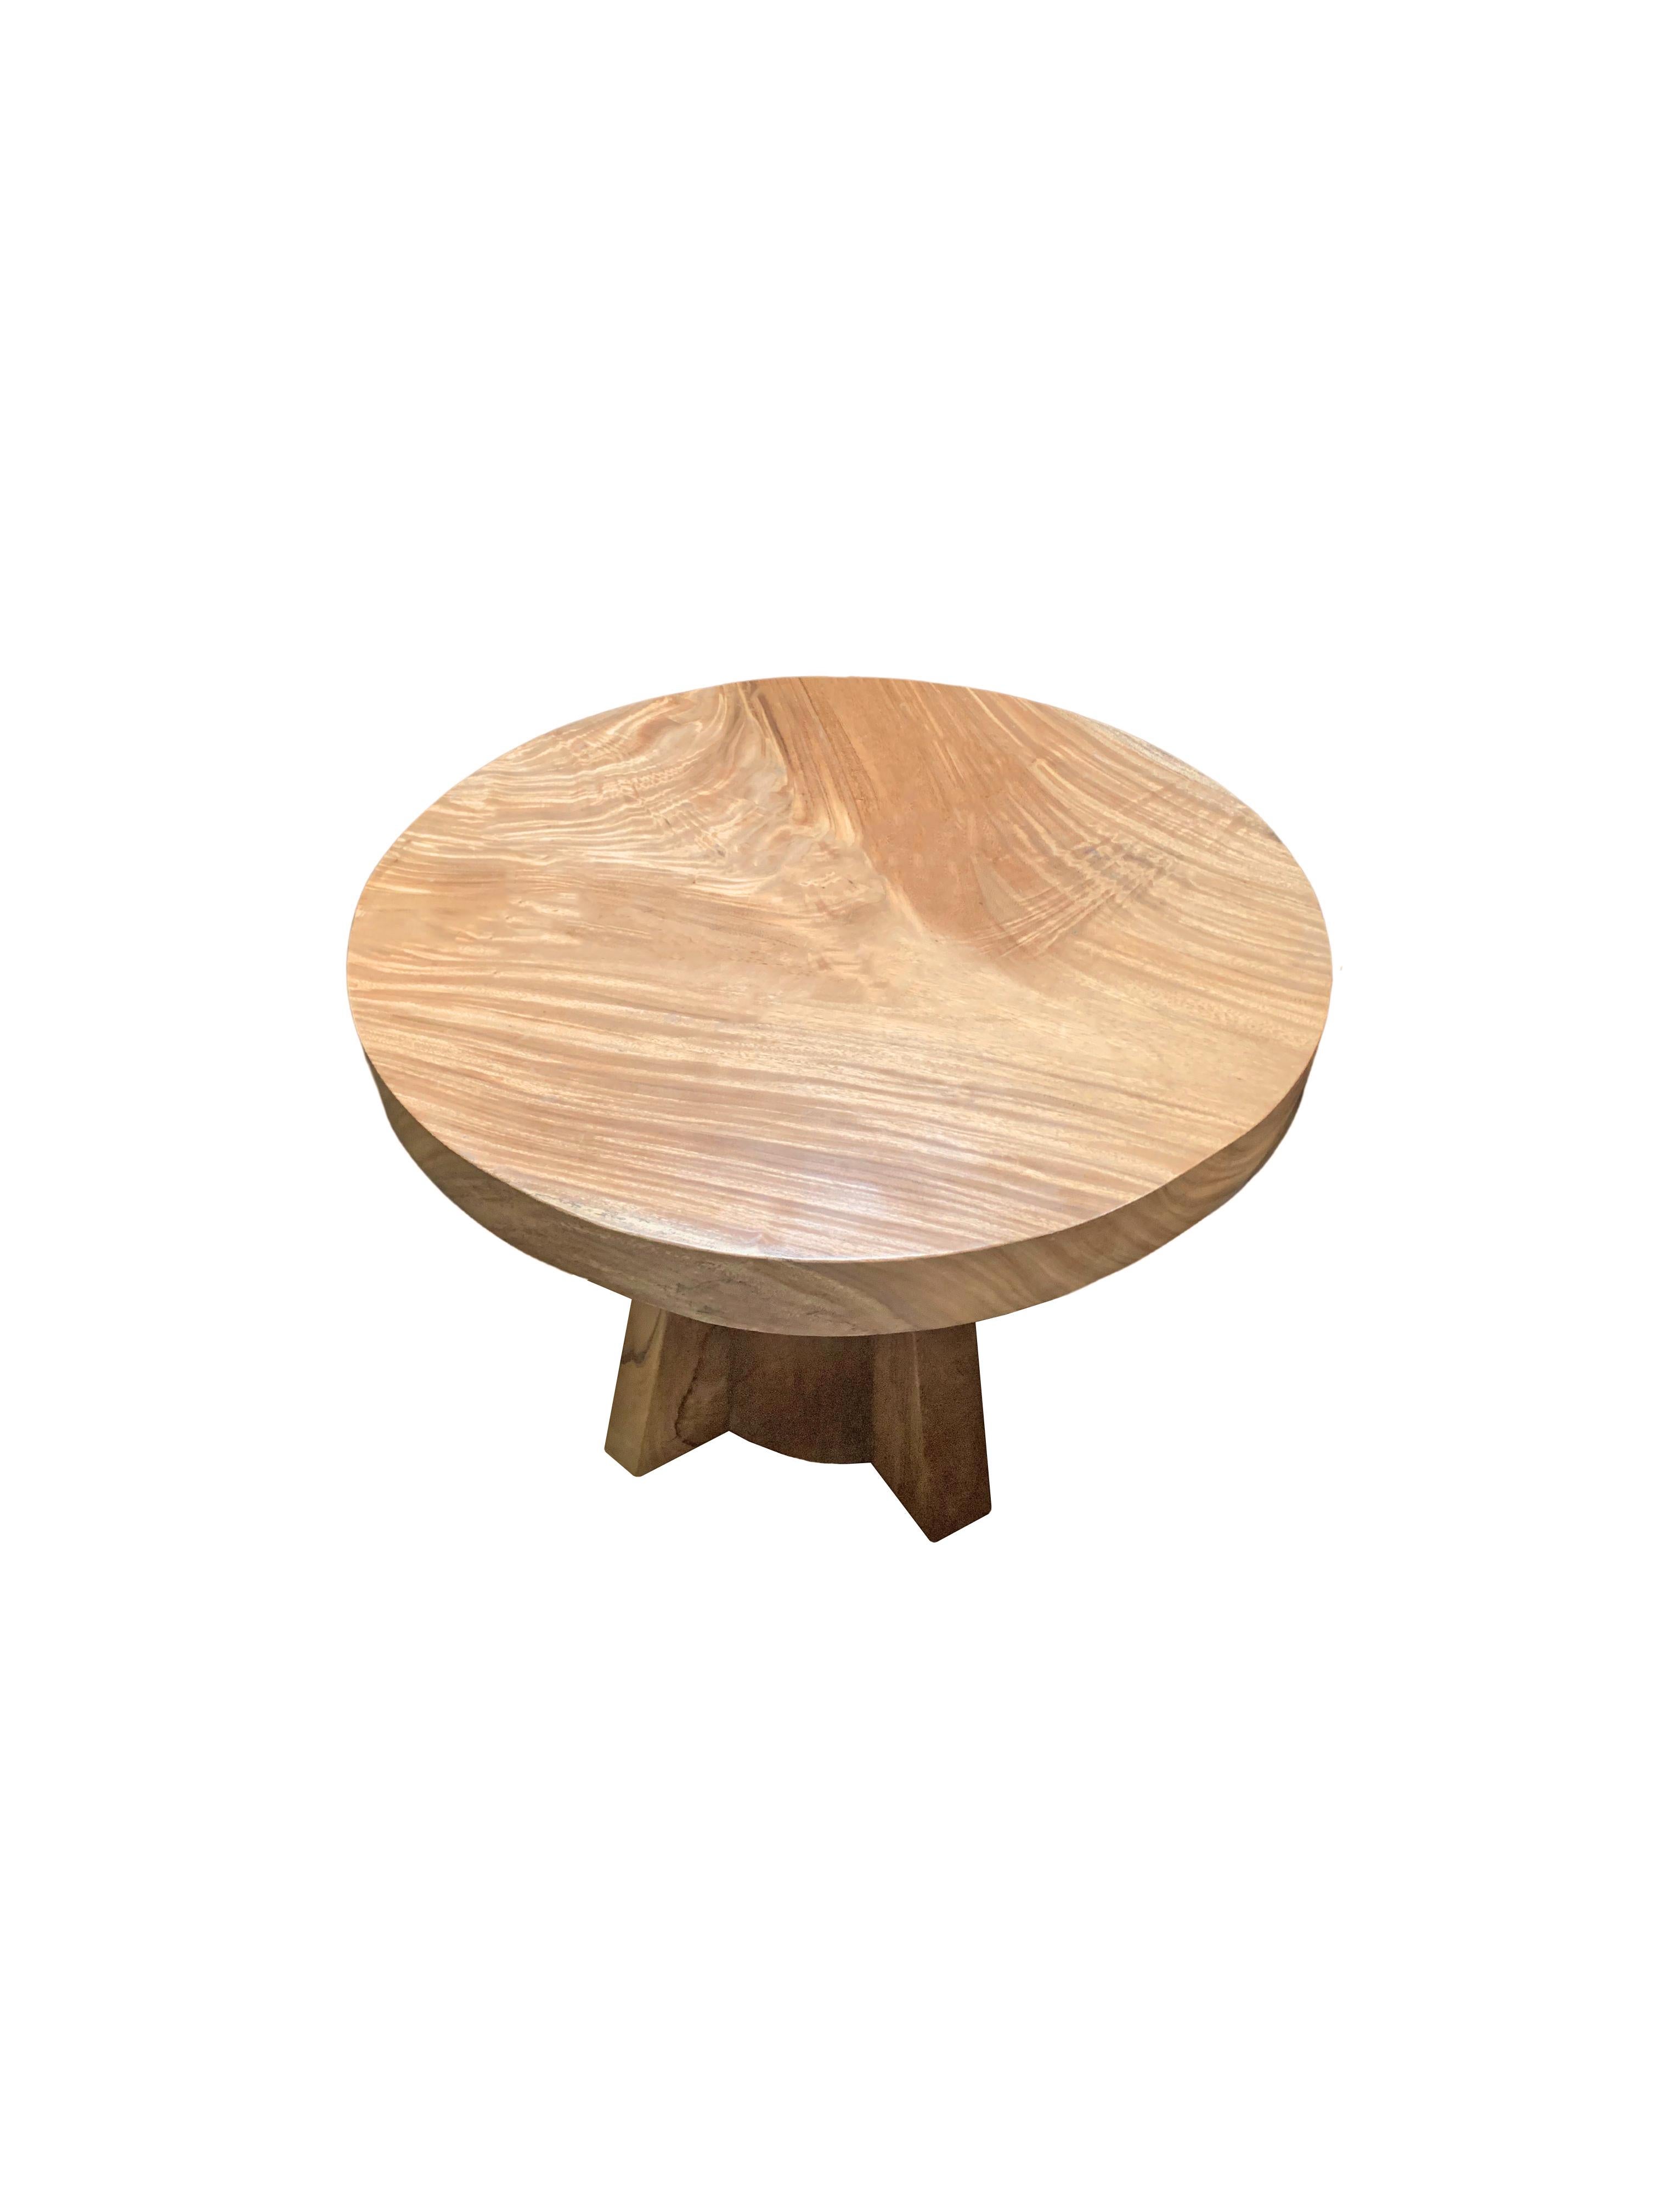 Hand-Crafted Sculptural Suar Wood Round Table